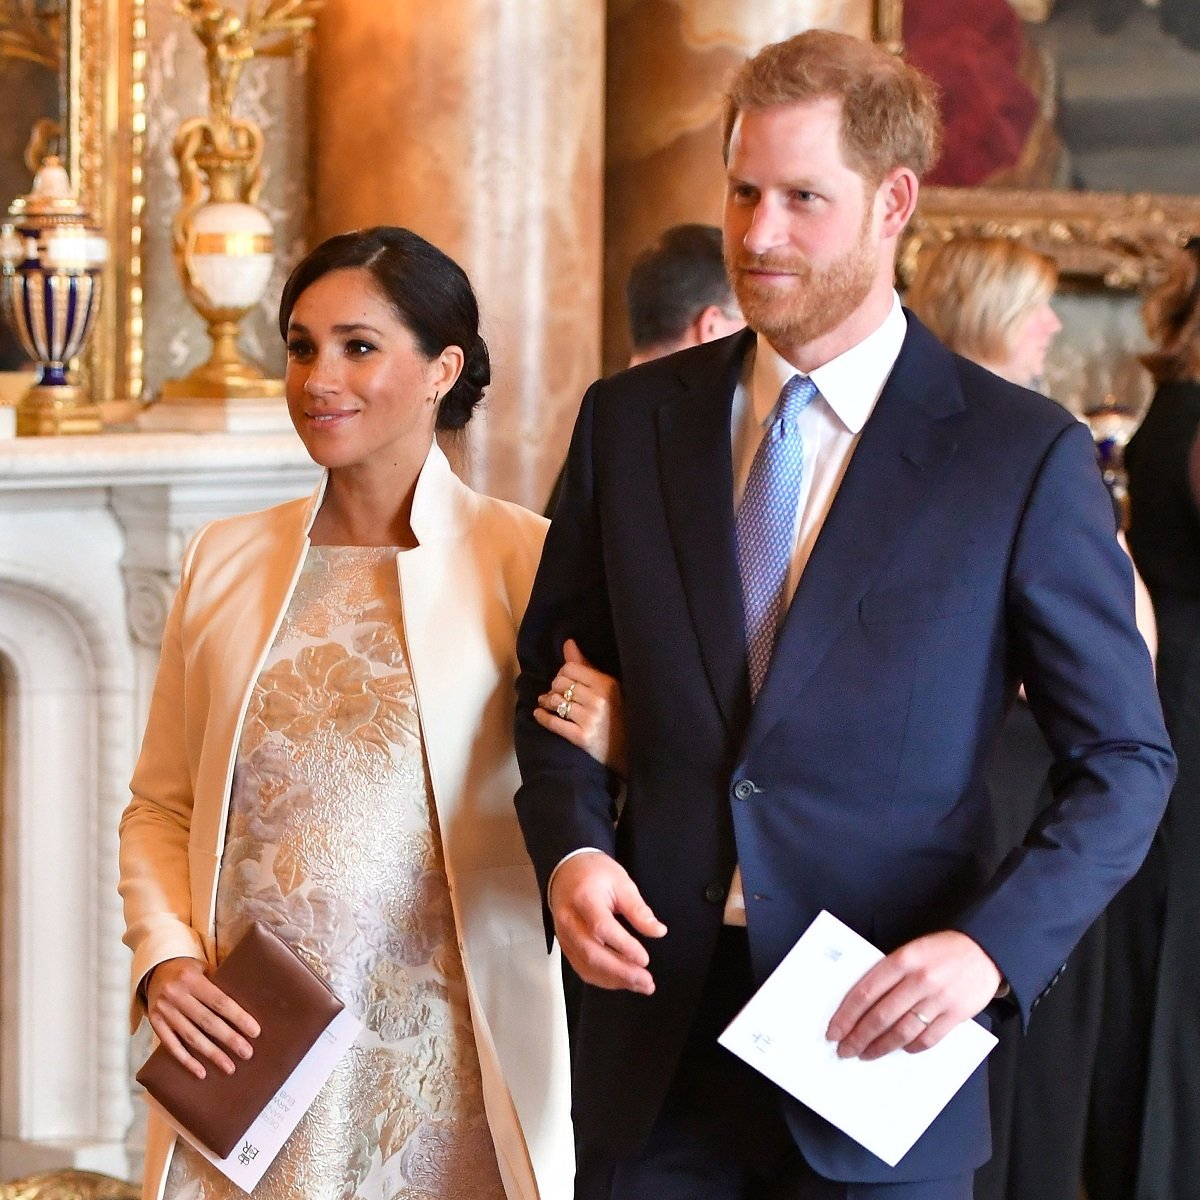 Prince Harry and Meghan Markle walking arm in arm to reception at Buckingham Palace